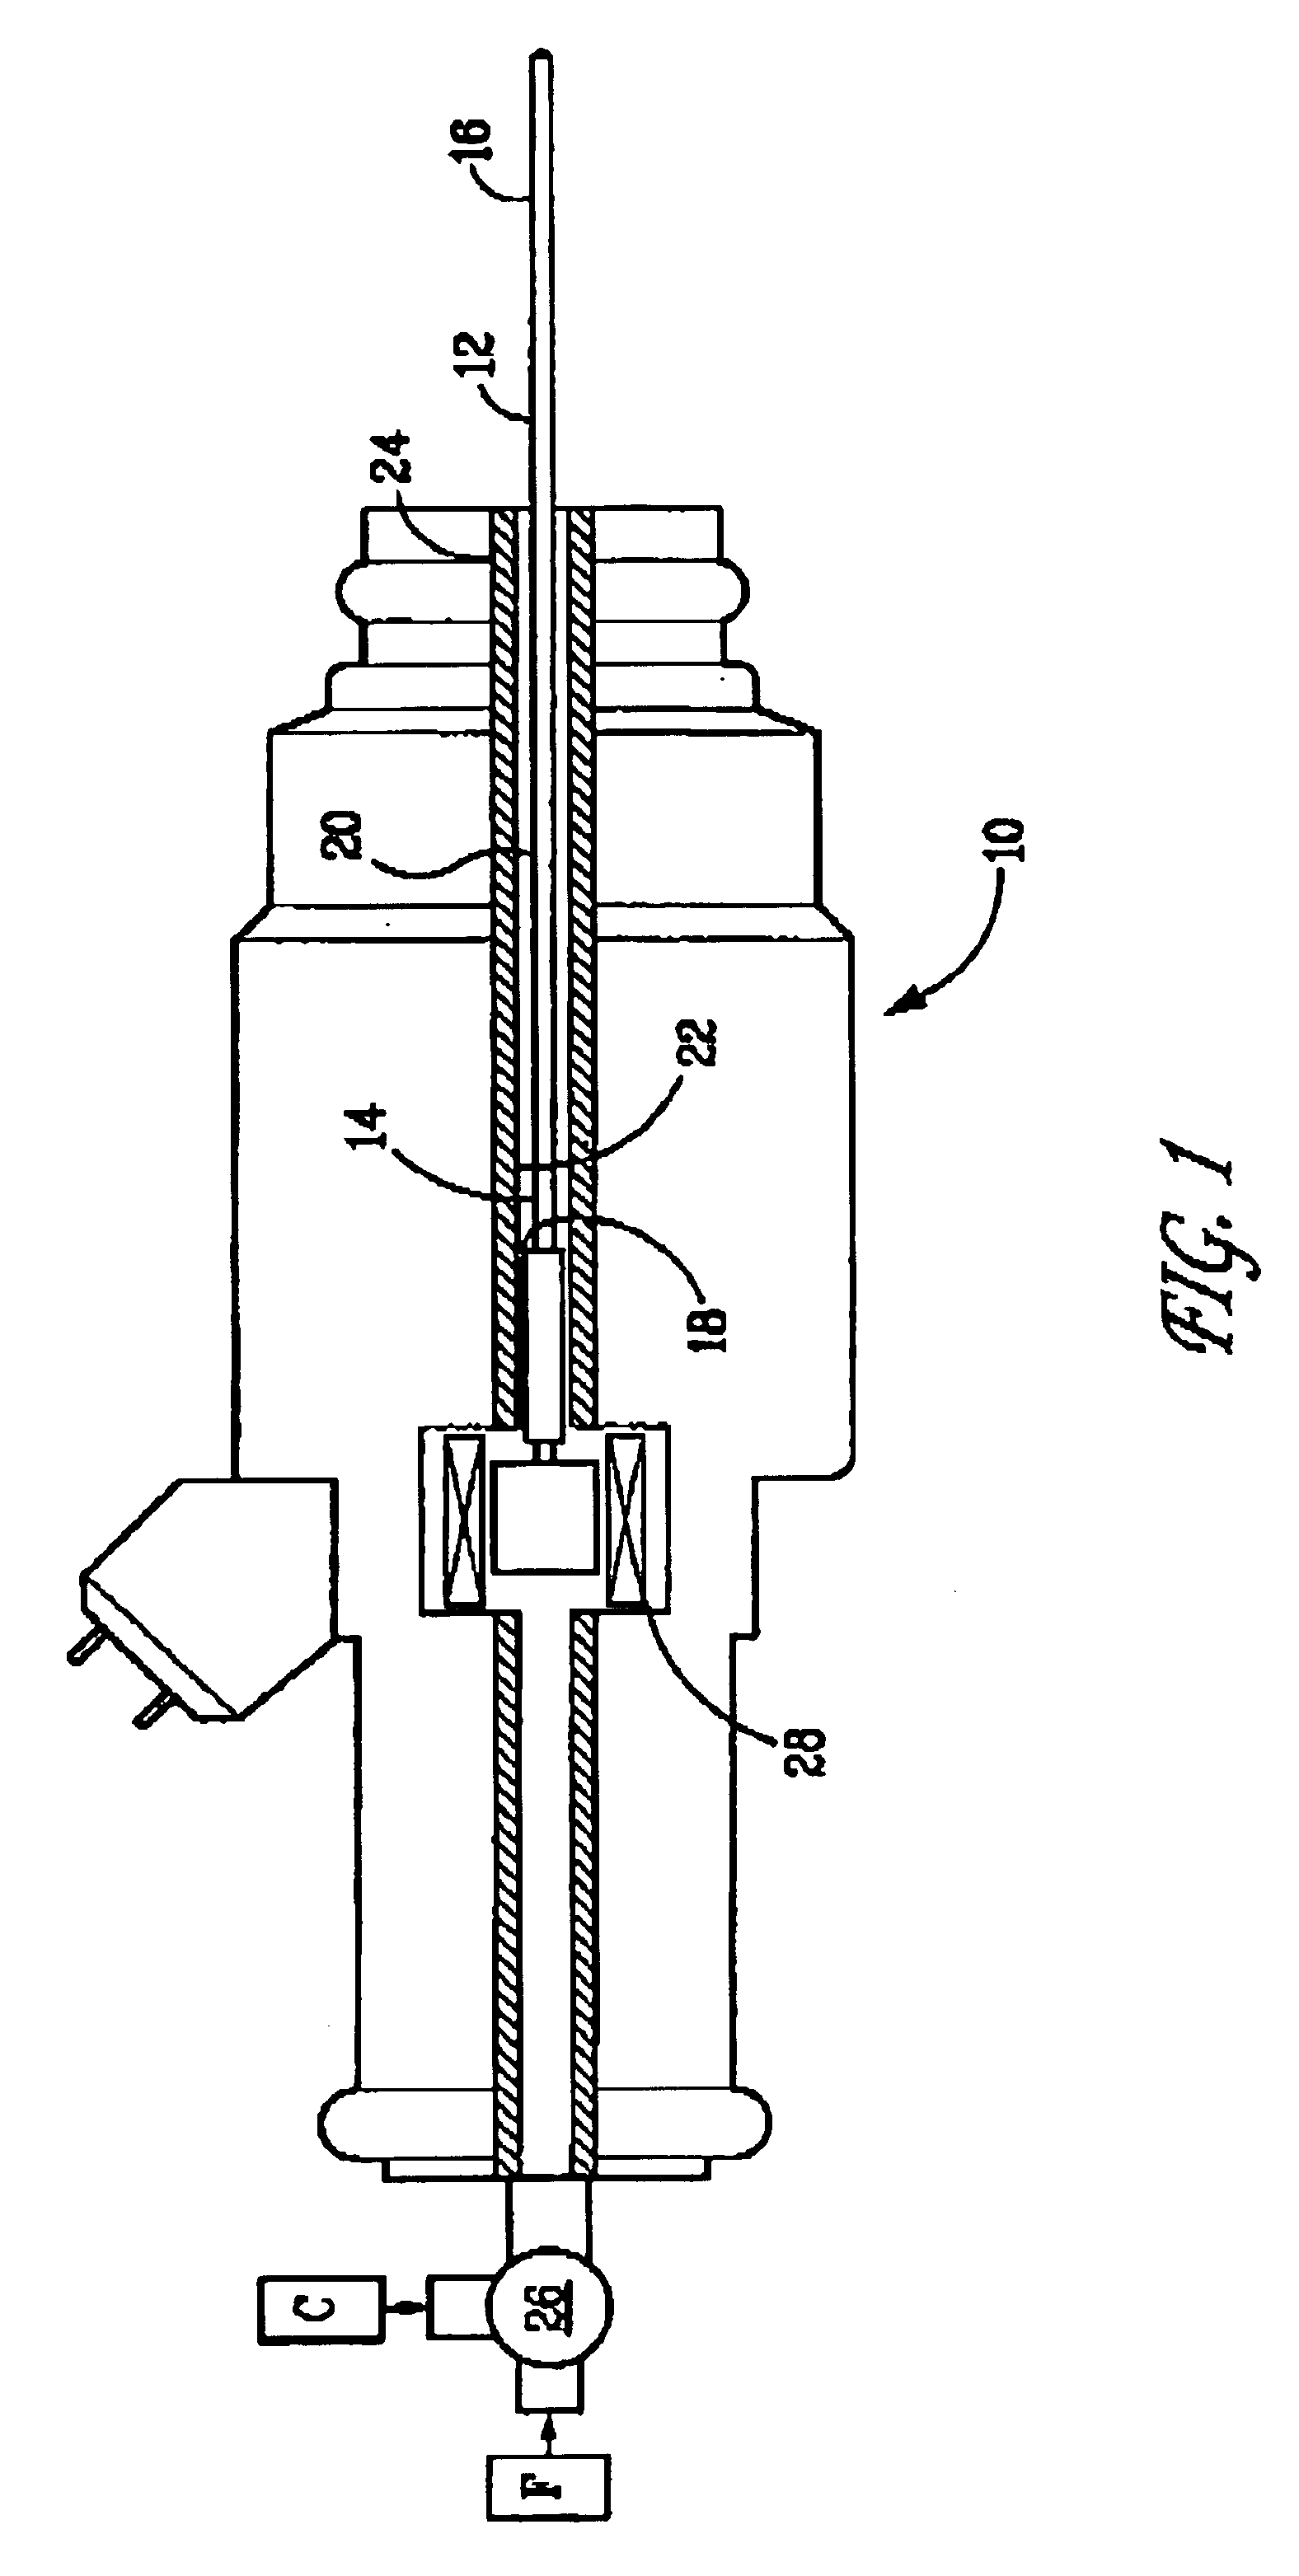 Apparatus and method for preparing and delivering fuel